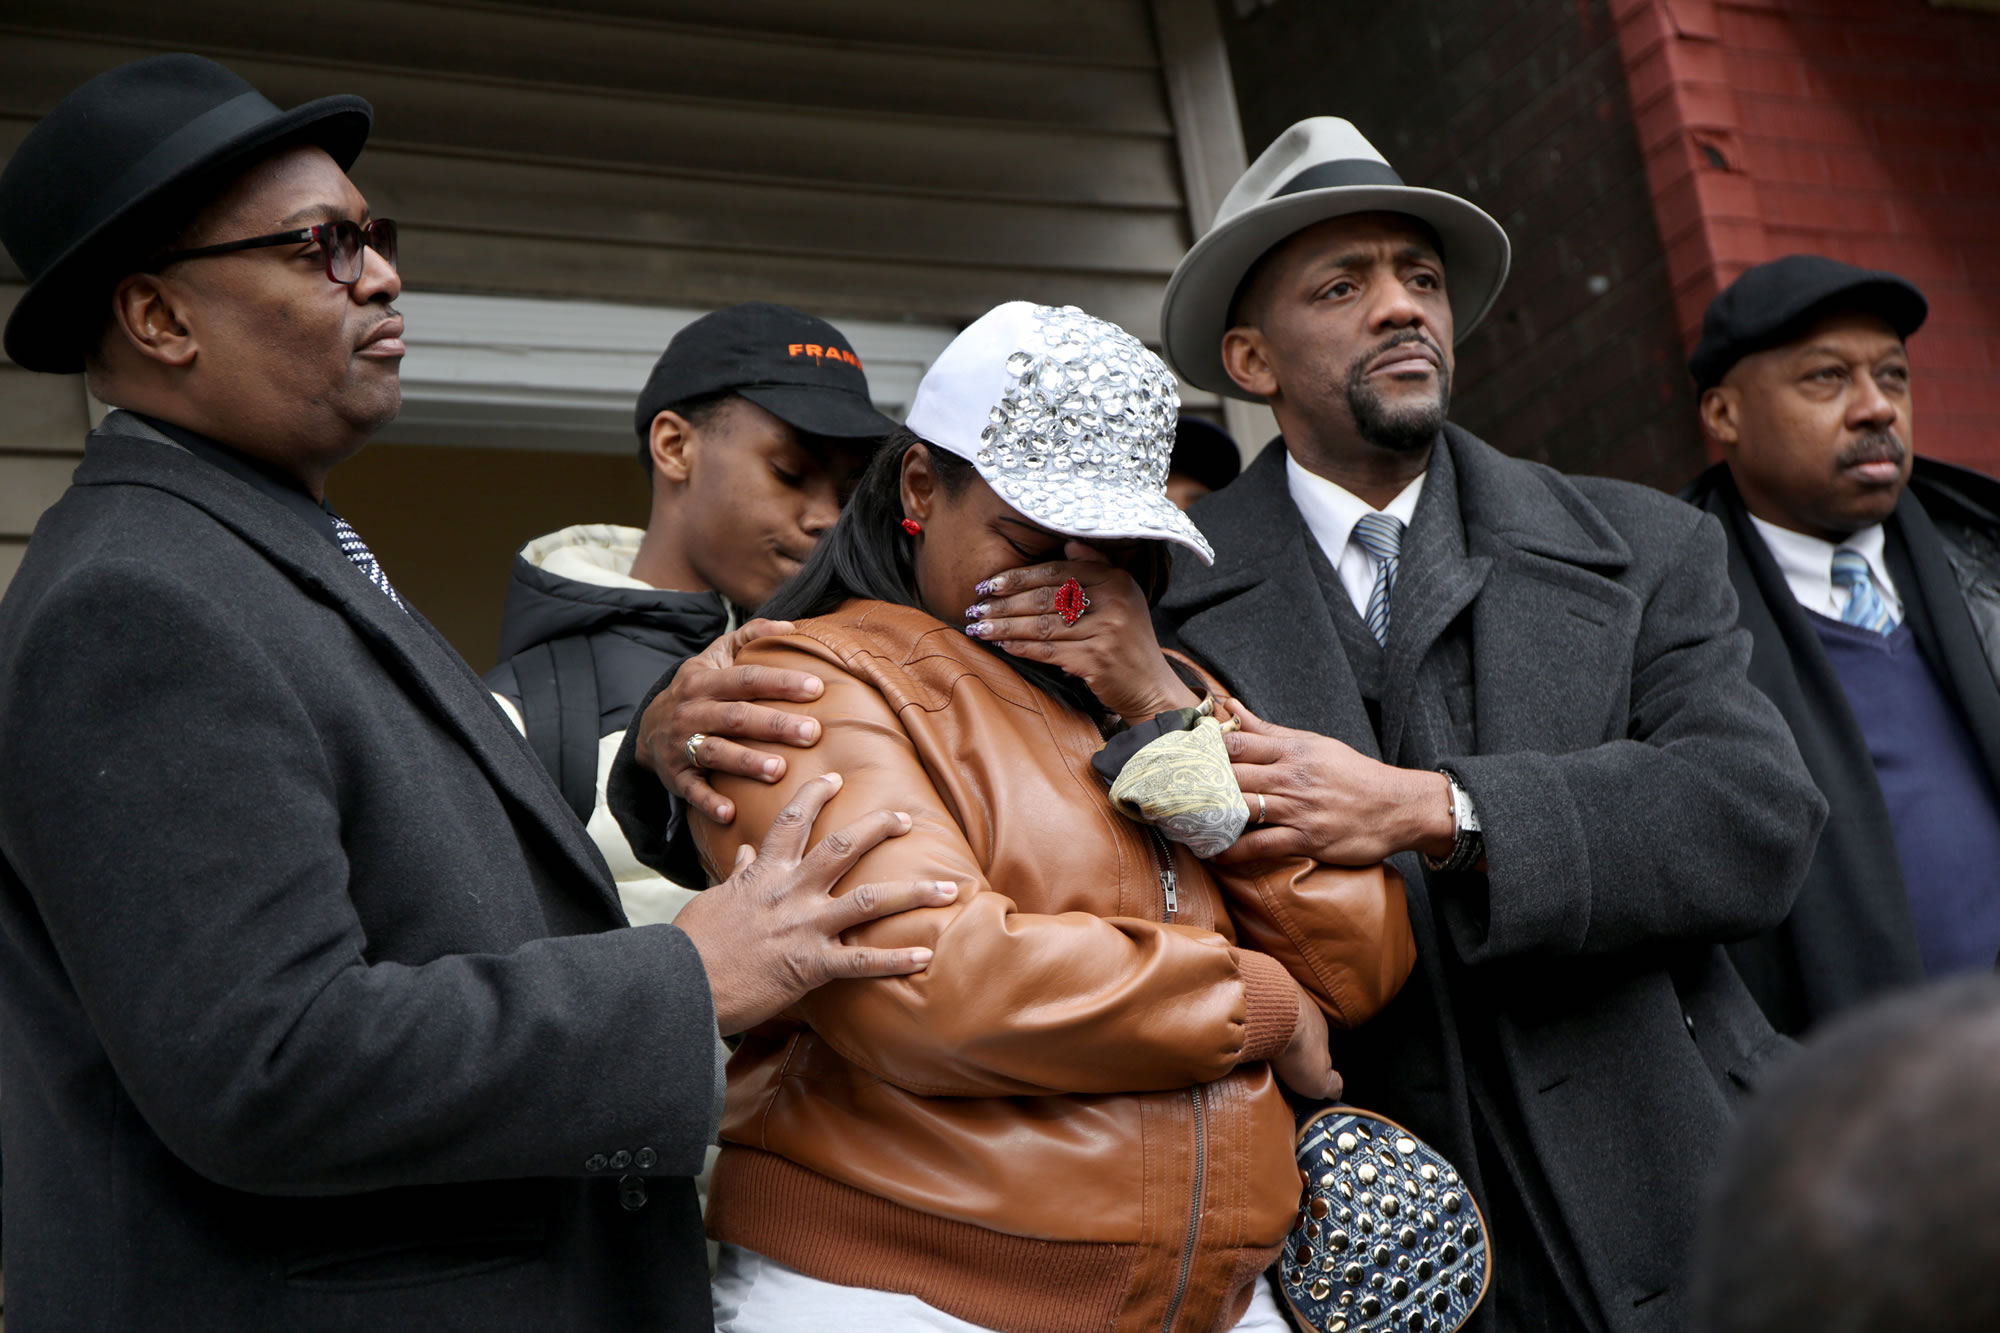 LaTarsha Jones, center, the daughter of Bettie Jones, is comforted by family and friends during a press conference Sunday in front of the house where Bettie Jones was killed Saturday in the West Garfield Park neighborhood of Chicago.